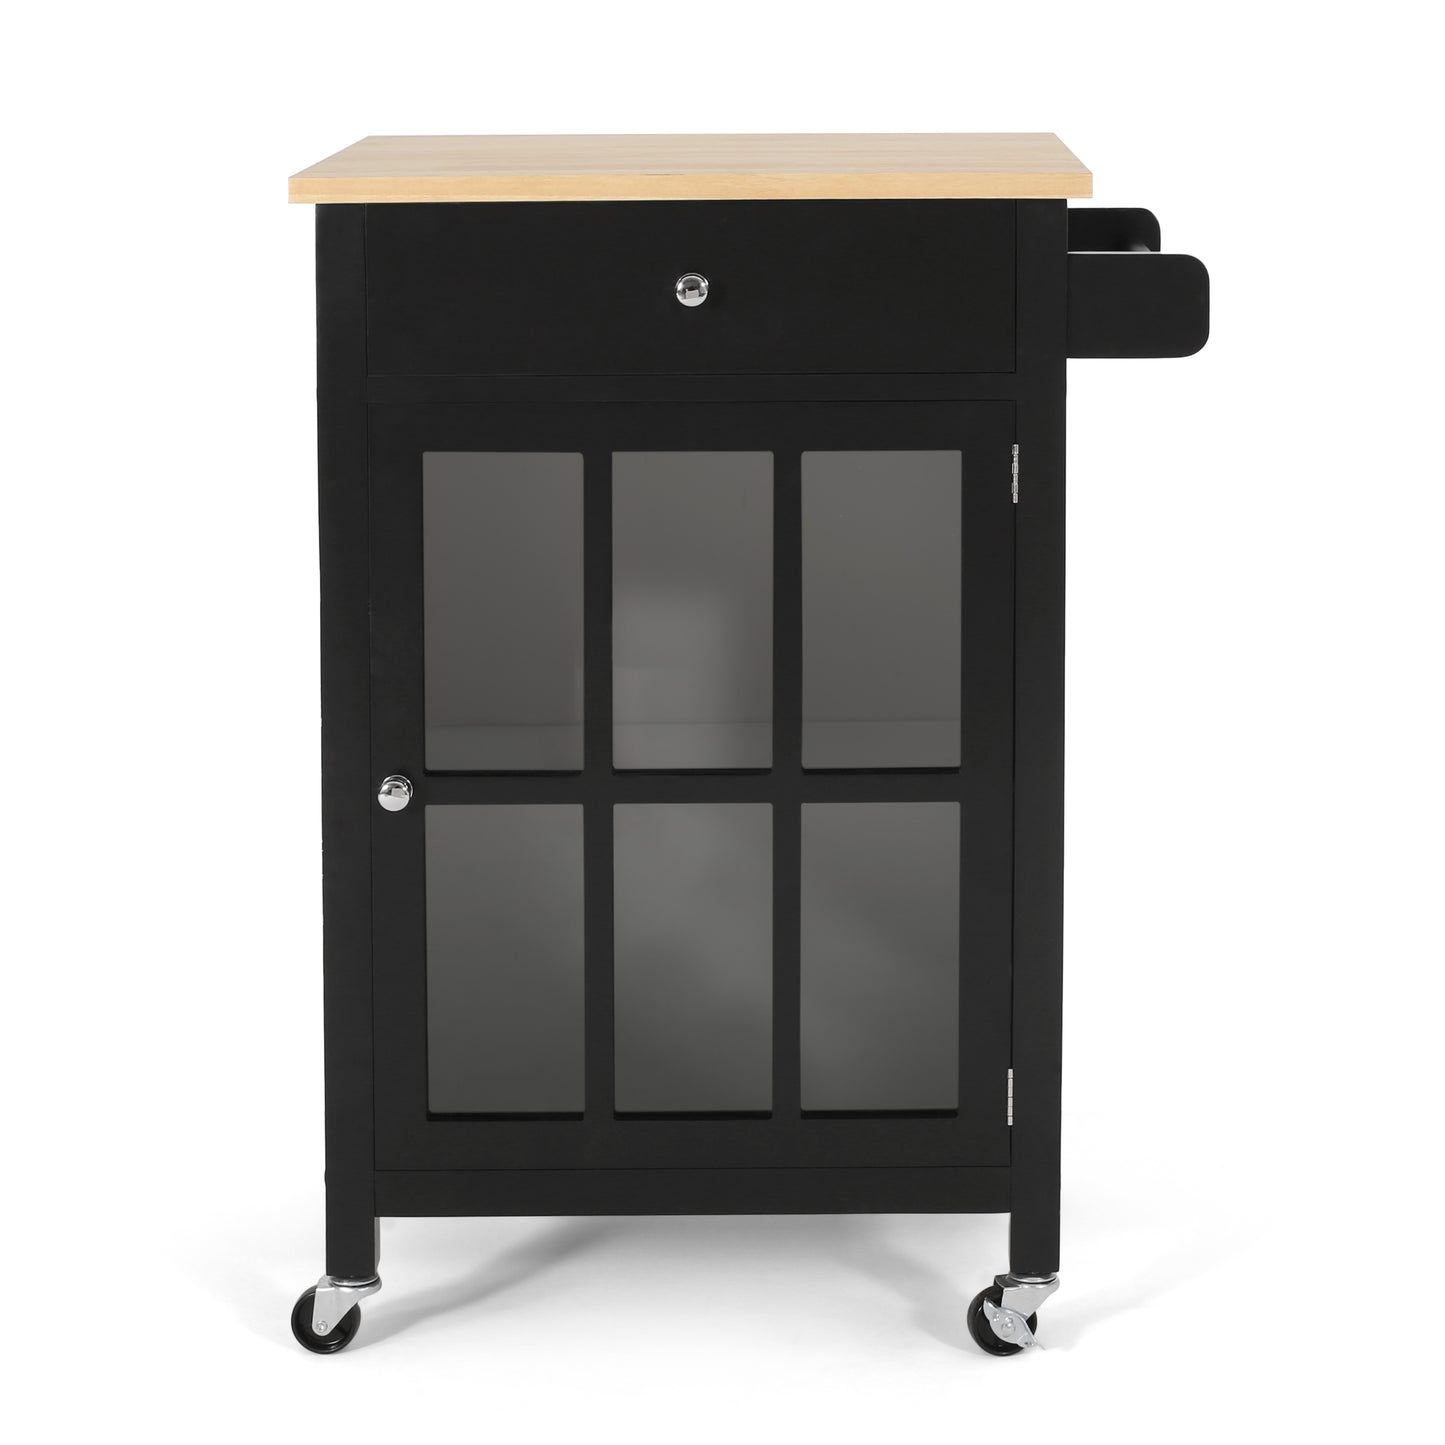 Medway Contemporary Glass Paneled Kitchen Cart